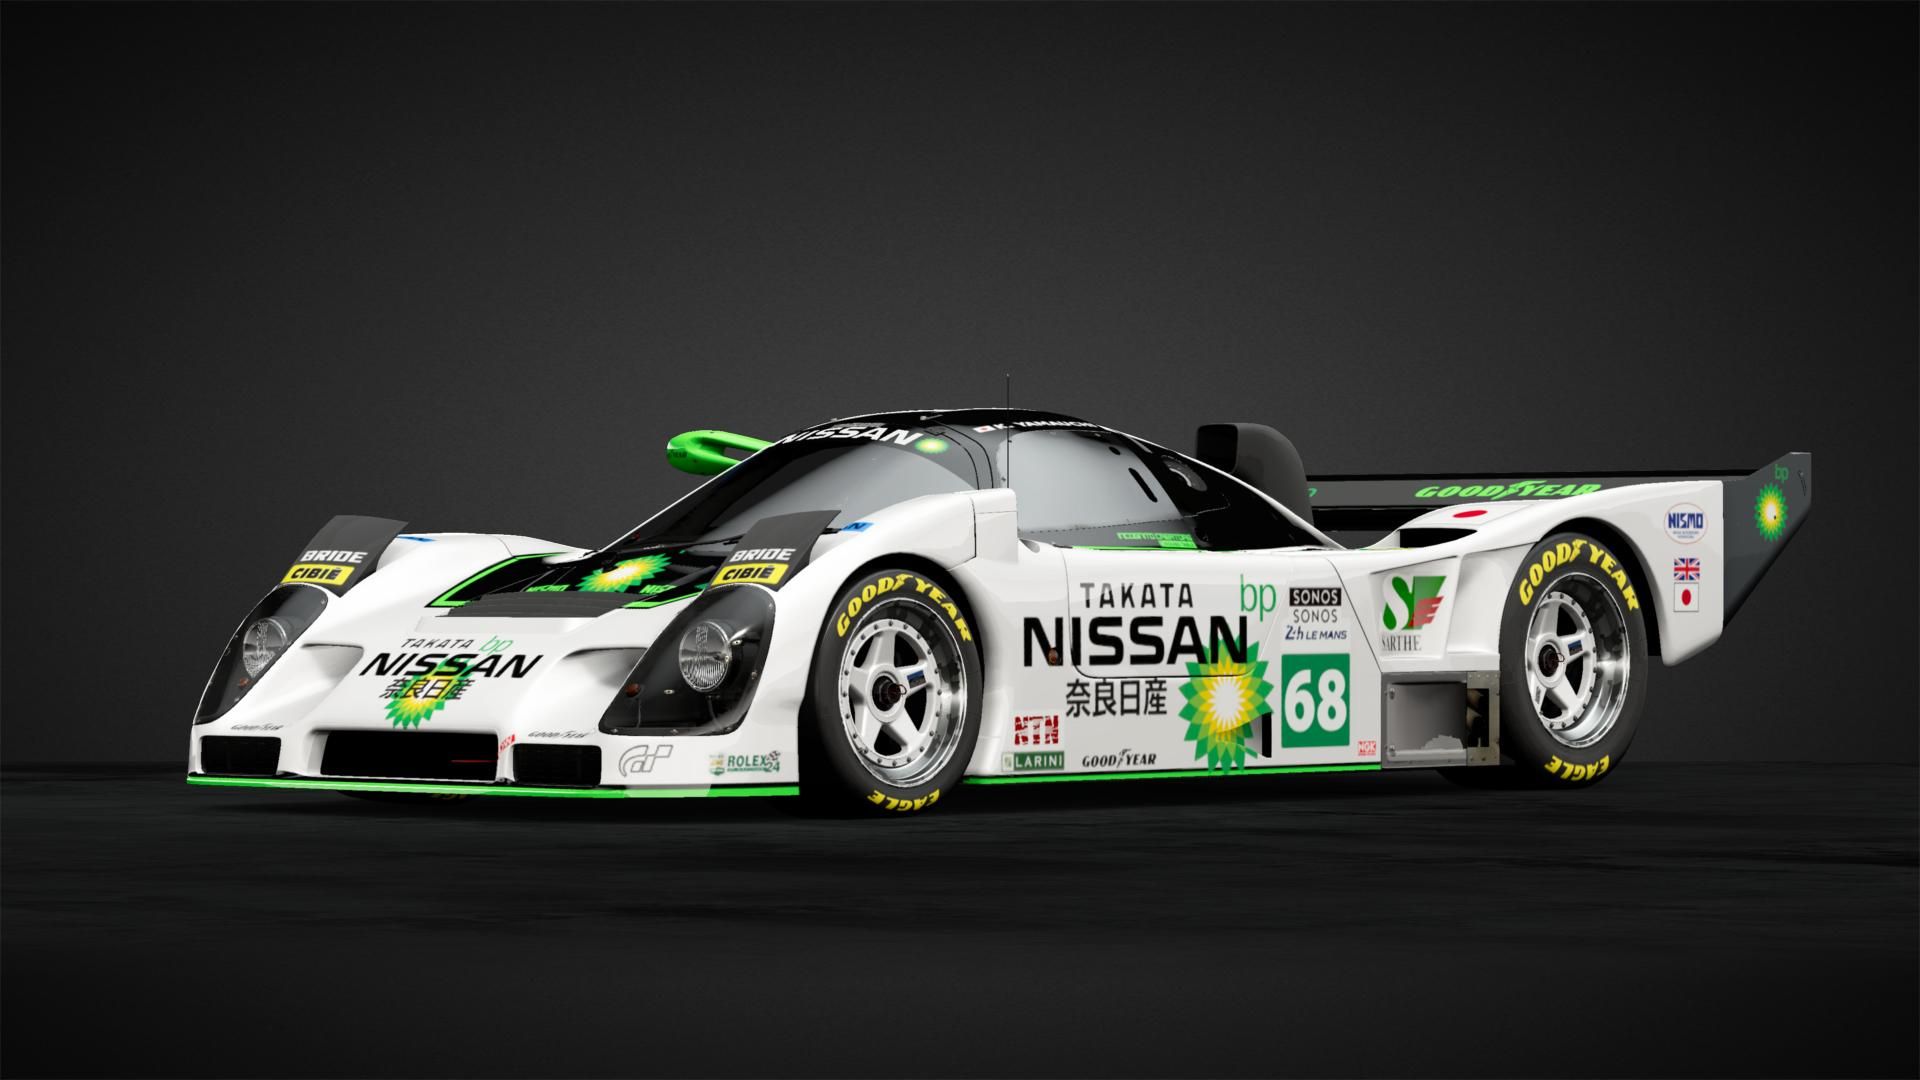 Nissan 92Cp Wallpapers